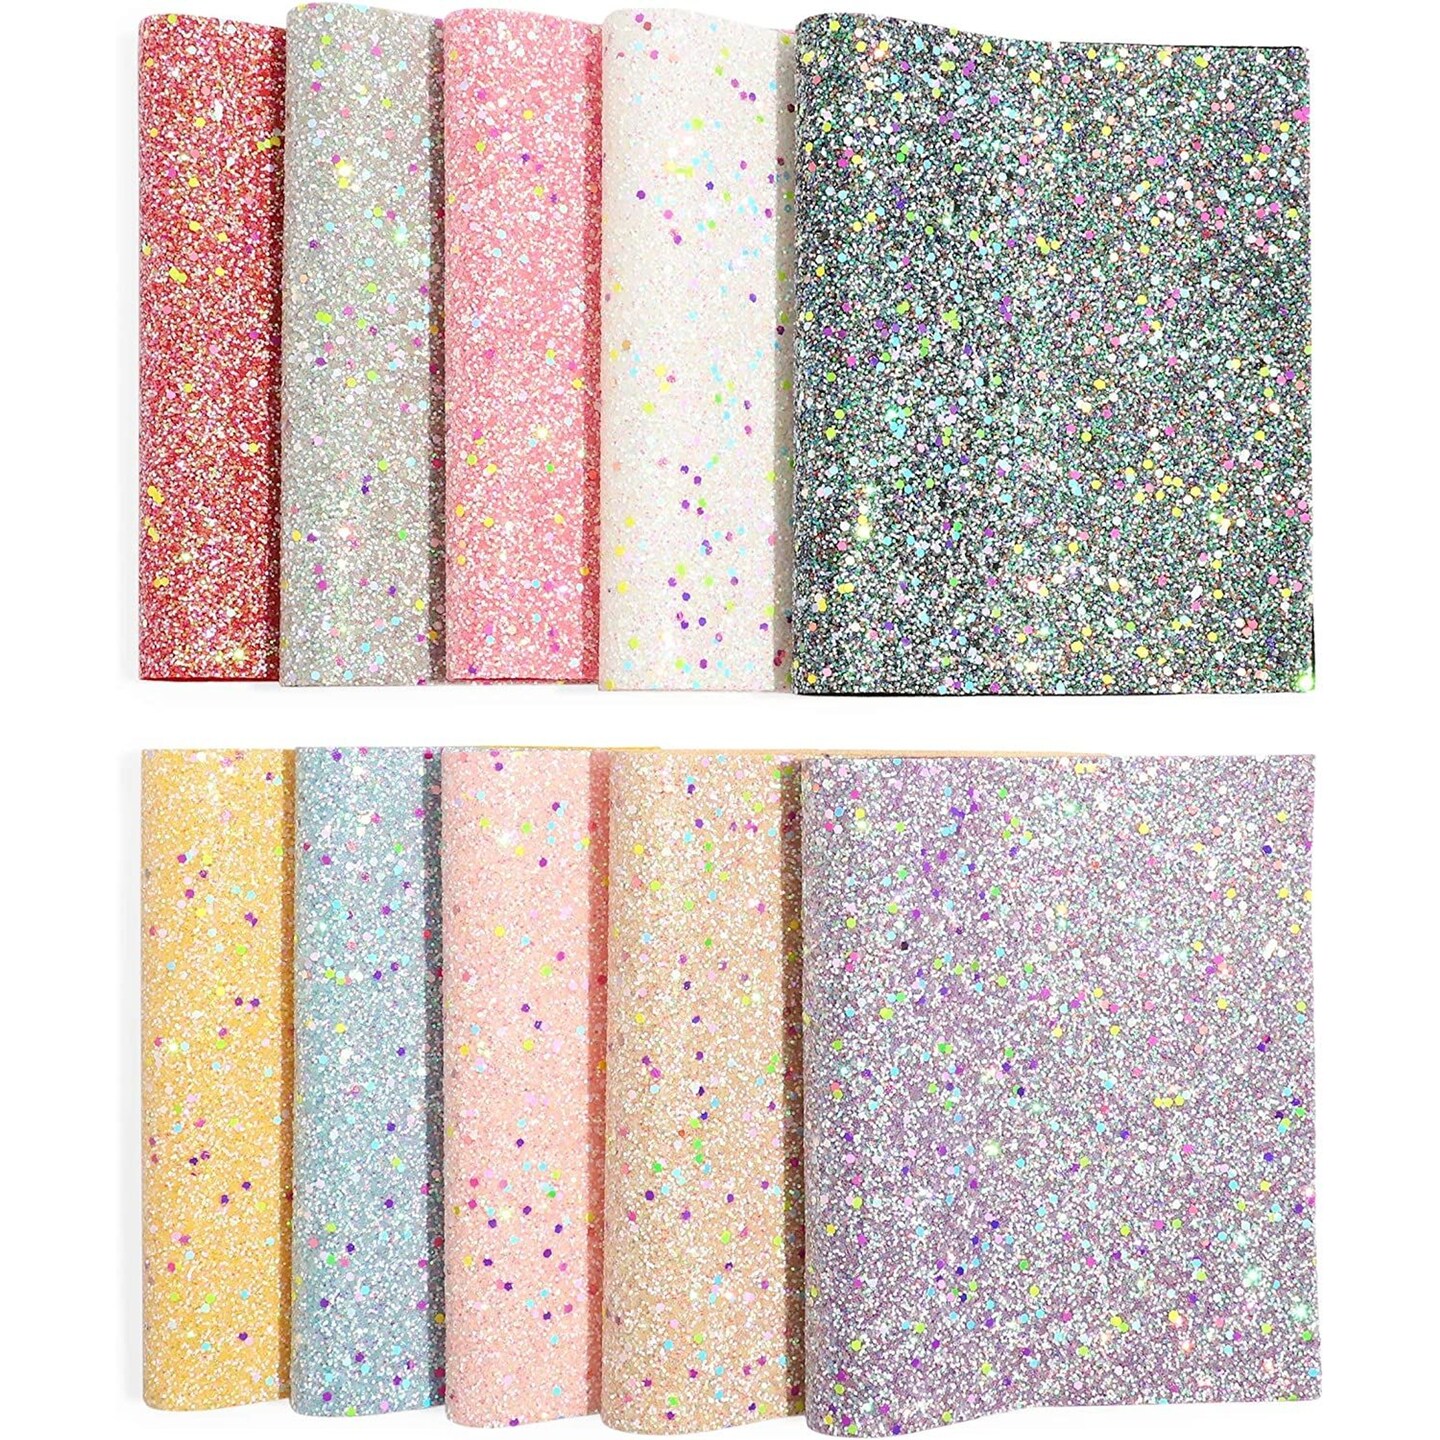 JINR 6 PCS/Set A4 Chunky Glitter Cricut Bundle PU Faux Leather Sheets, 8X12  Inch(21cmx30cm) Suit for Leather Earrings Bows Bags Sewing Crafts Making